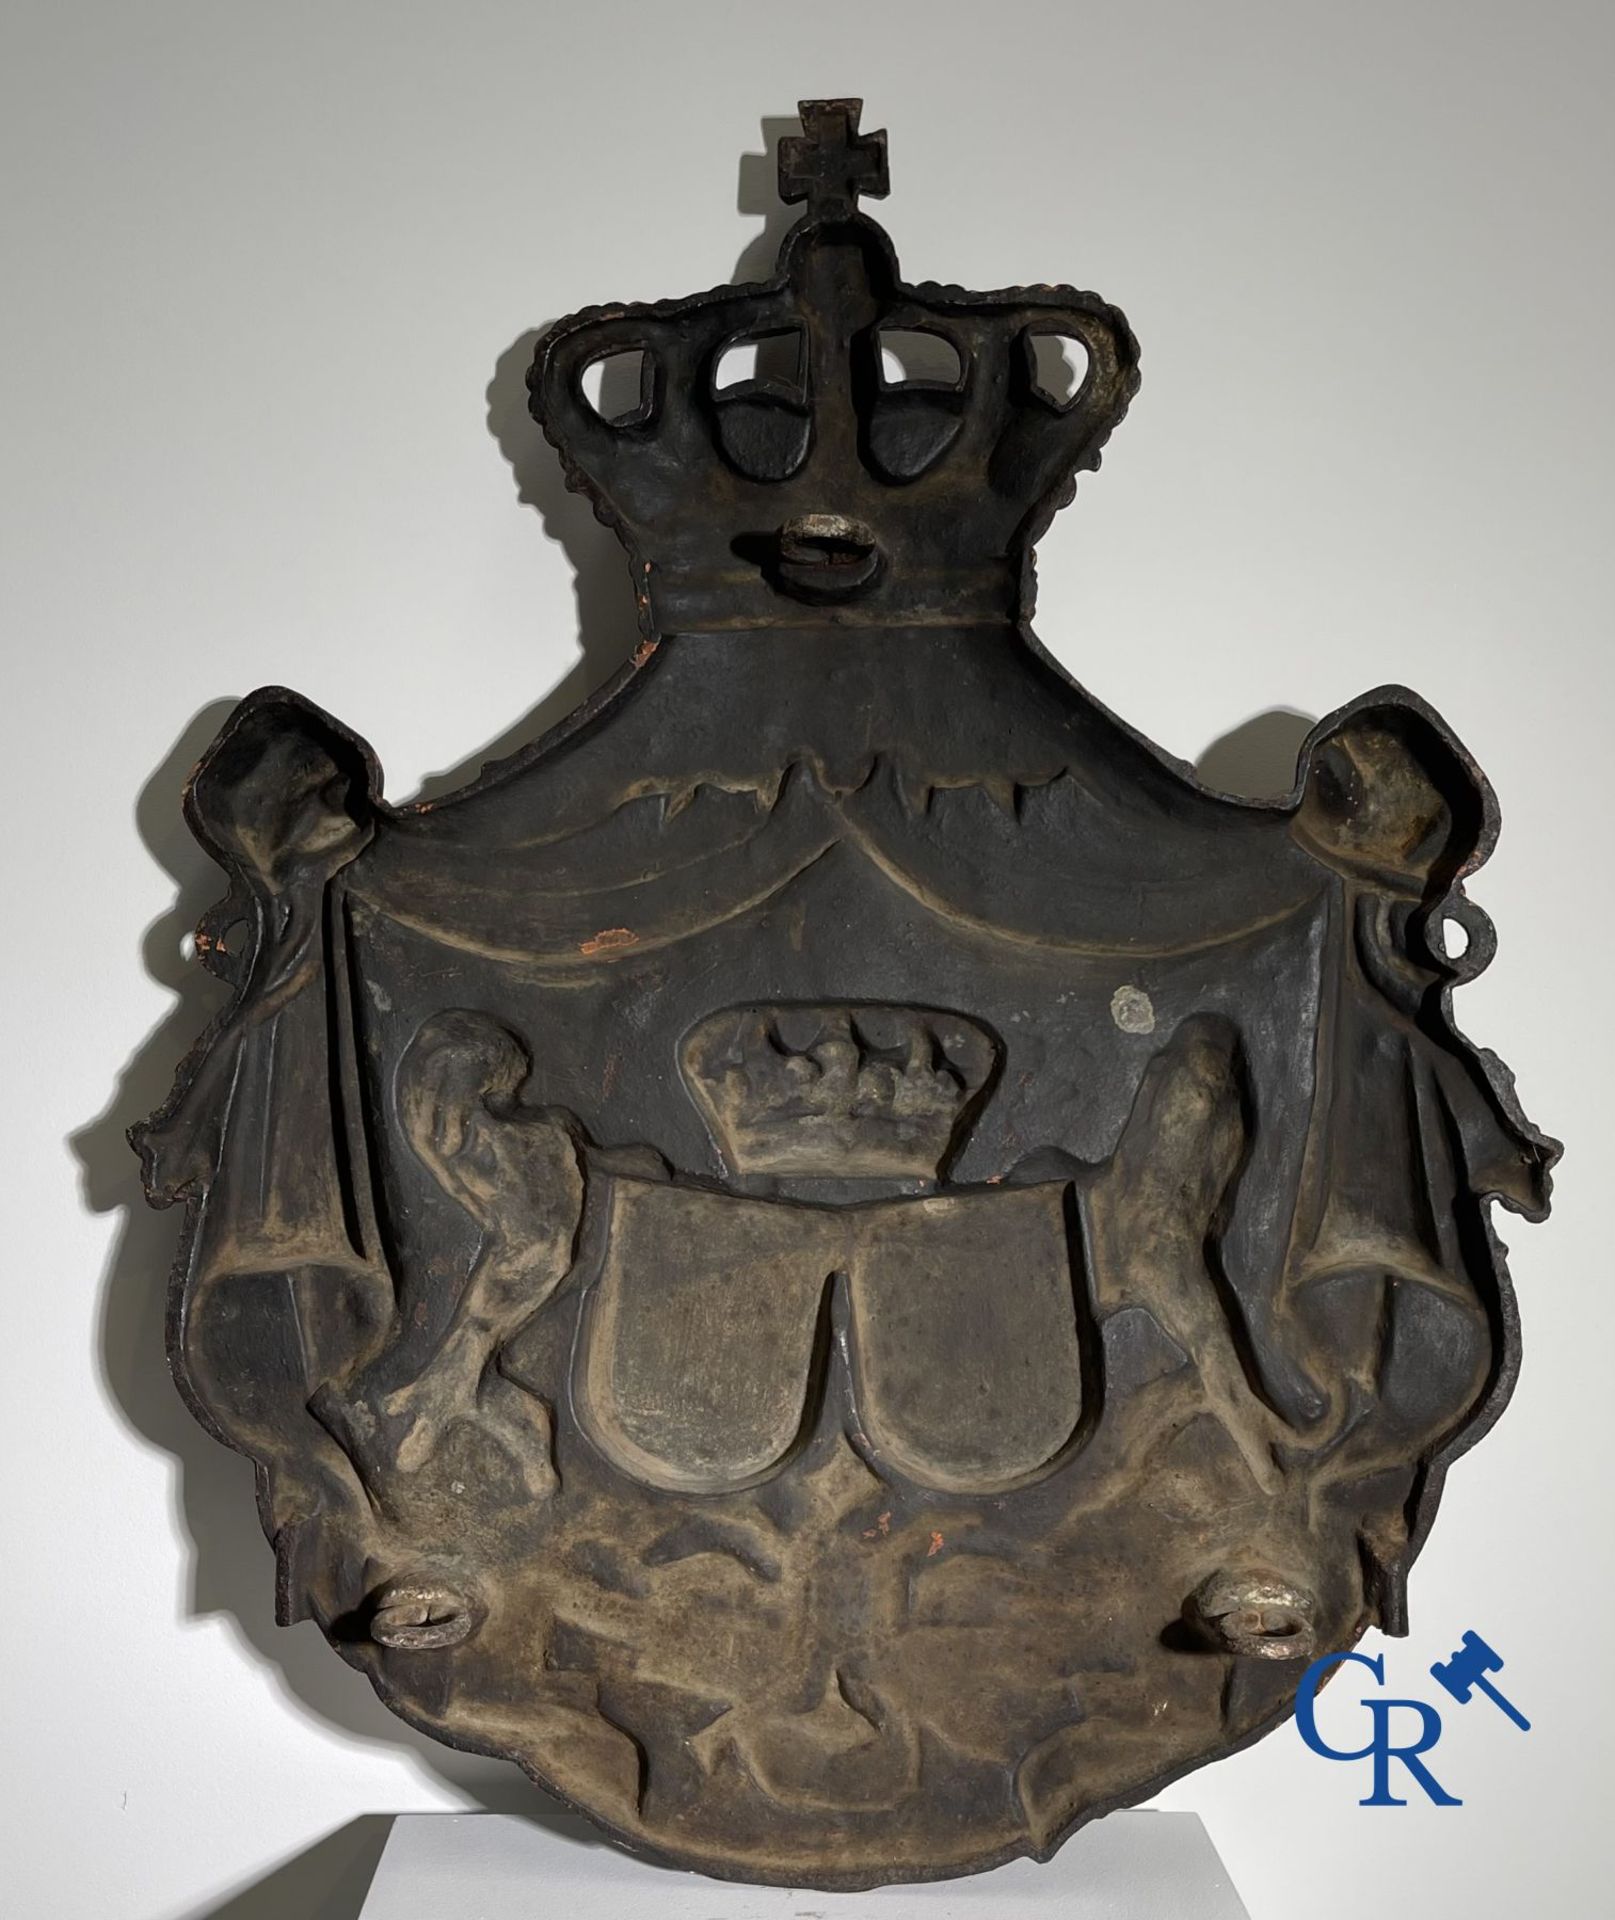 Exceptionally Royal Coat of Arms in dented and polychrome cast iron. the Netherlands, 19th century. - Image 12 of 13